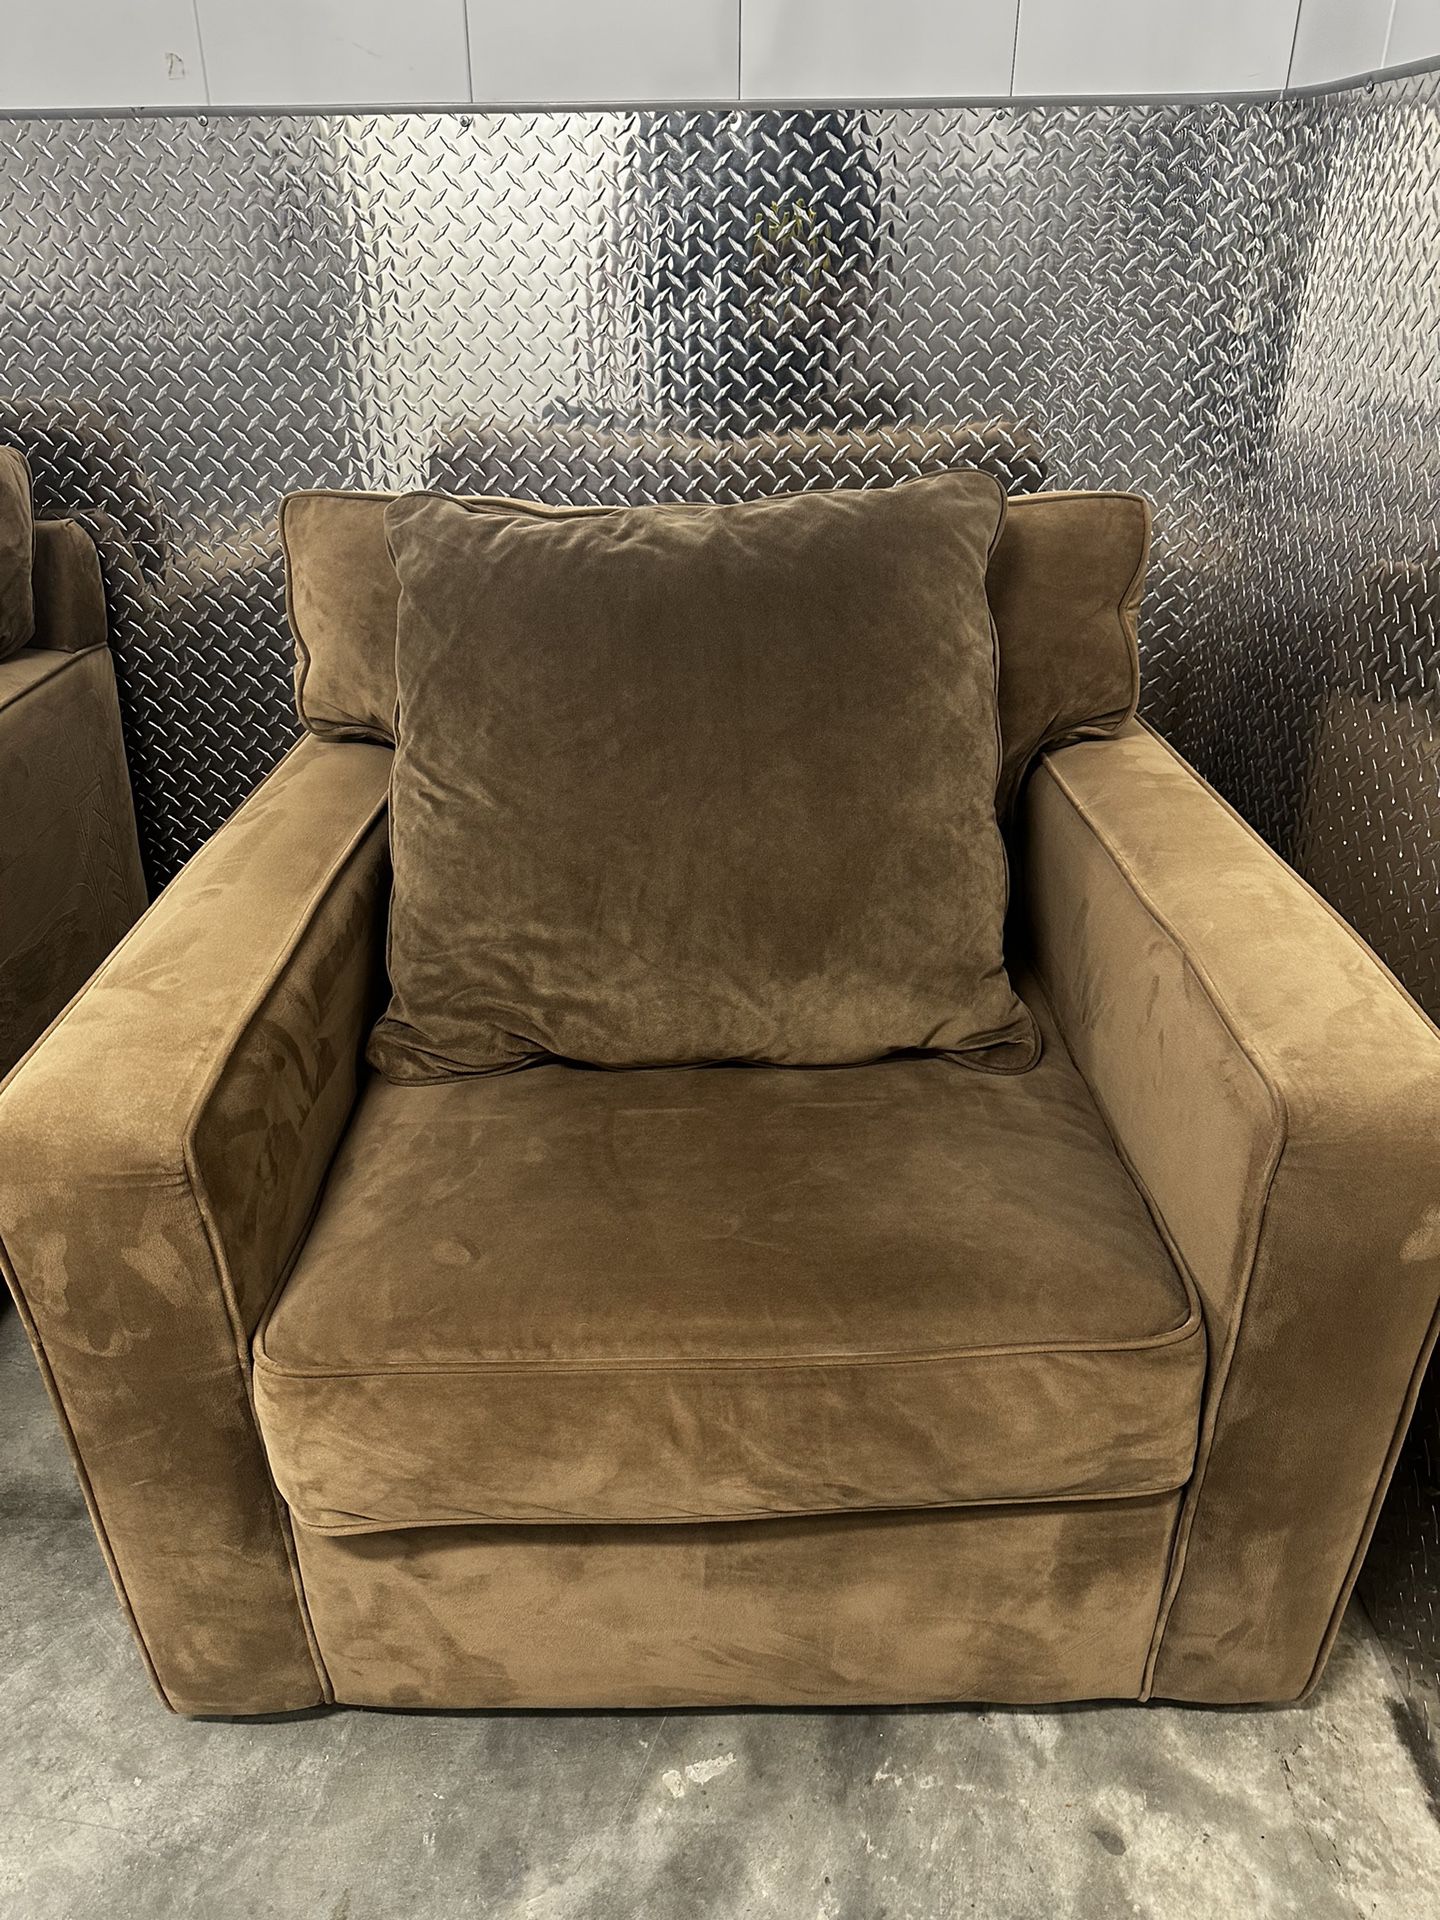 BROWN SWIVEL CHAIR W/ FREE DELIVERY 